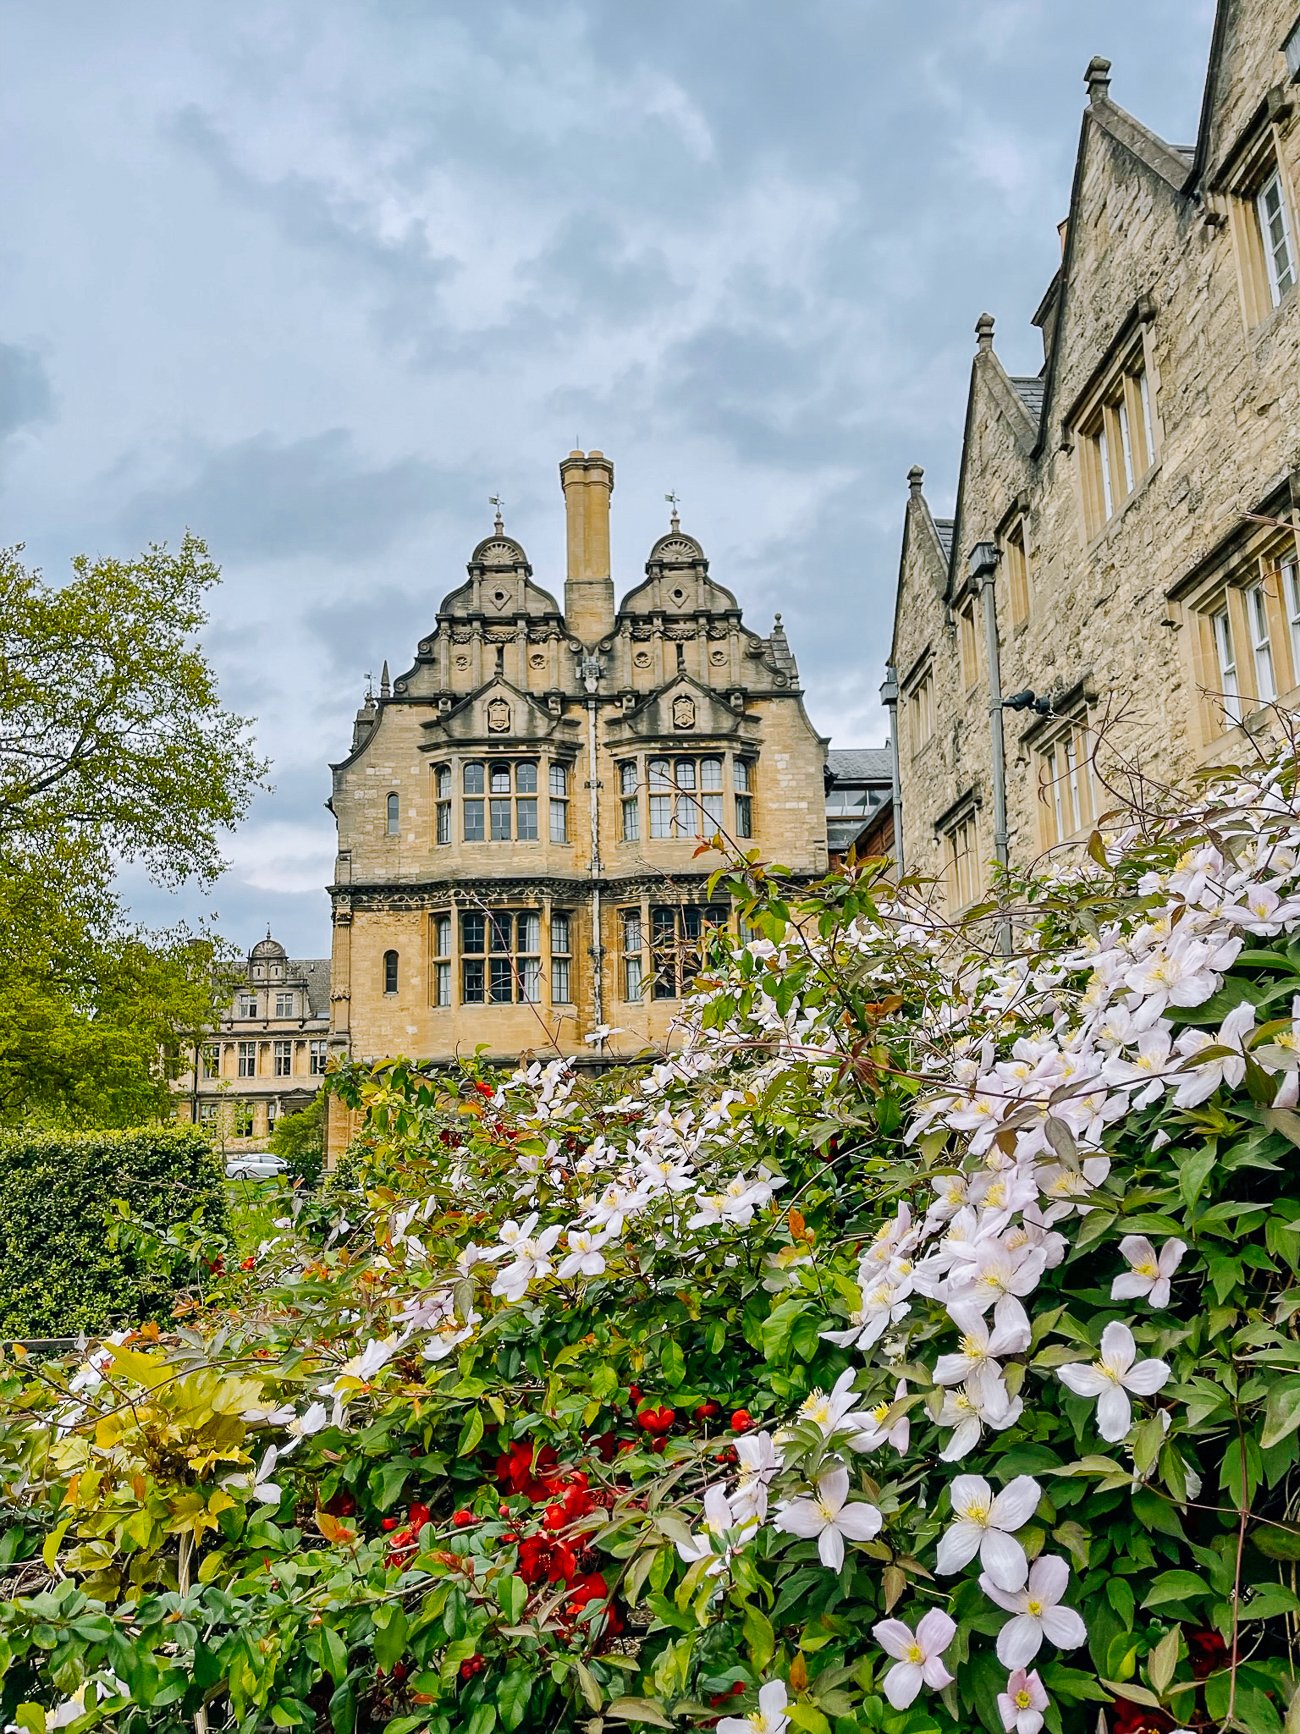 Oxford University building with flowers